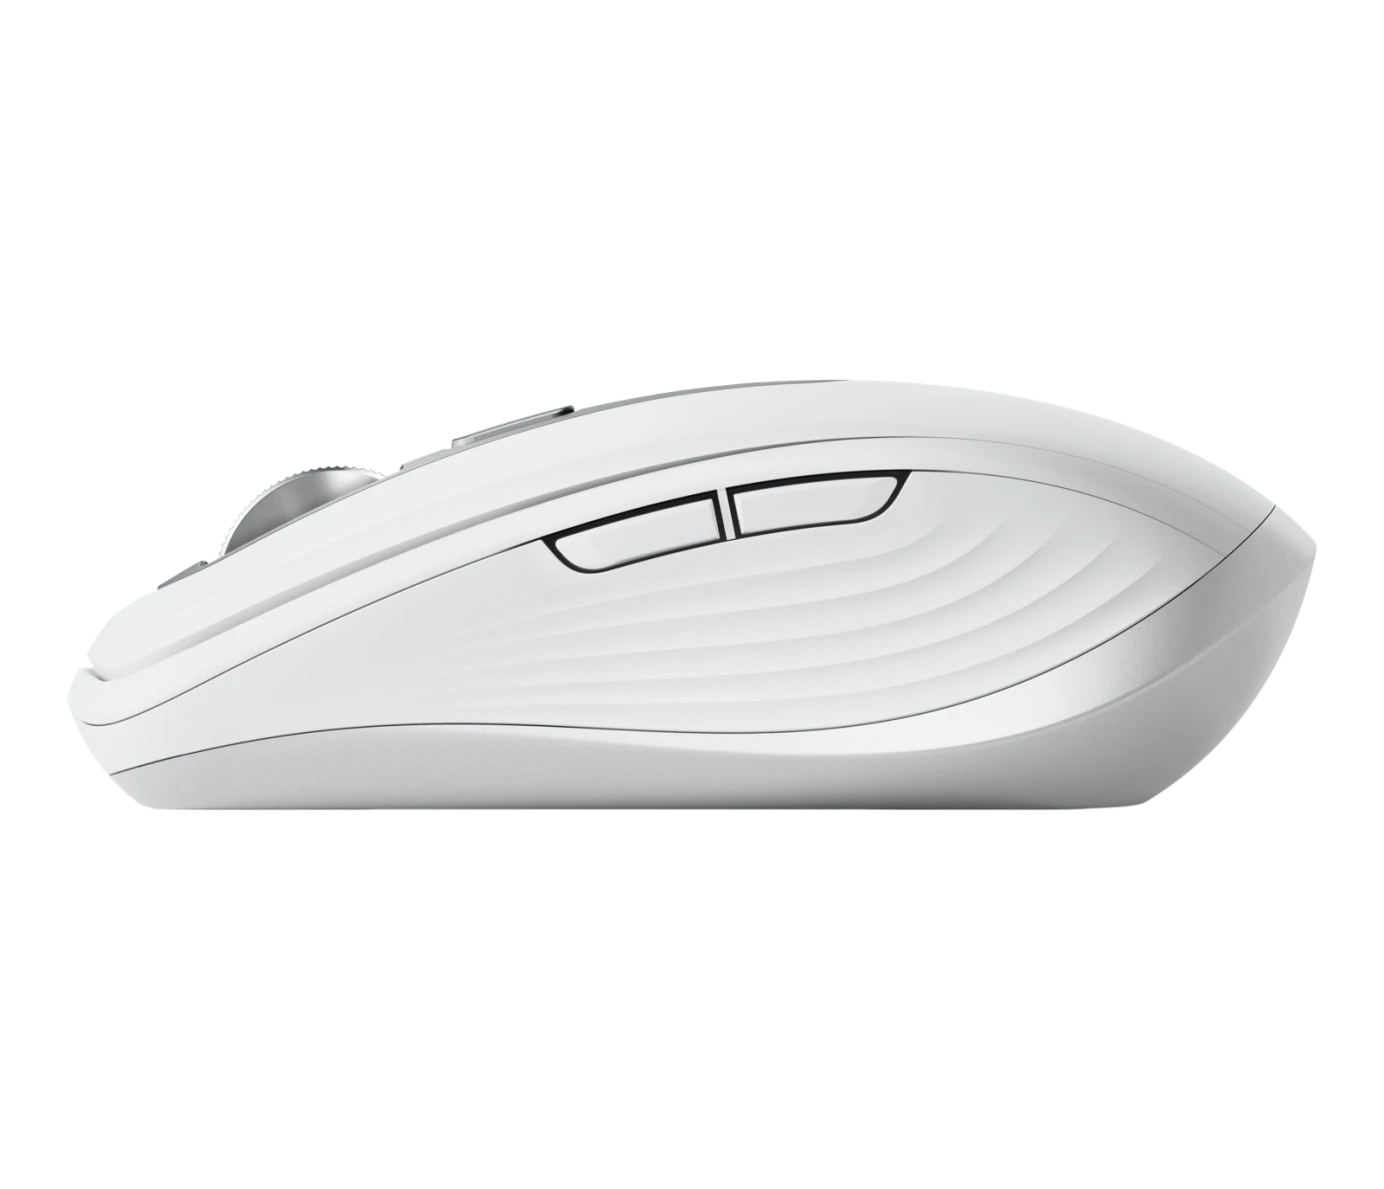 Logitech MX Anywhere 3 Wireless Mouse For Mac